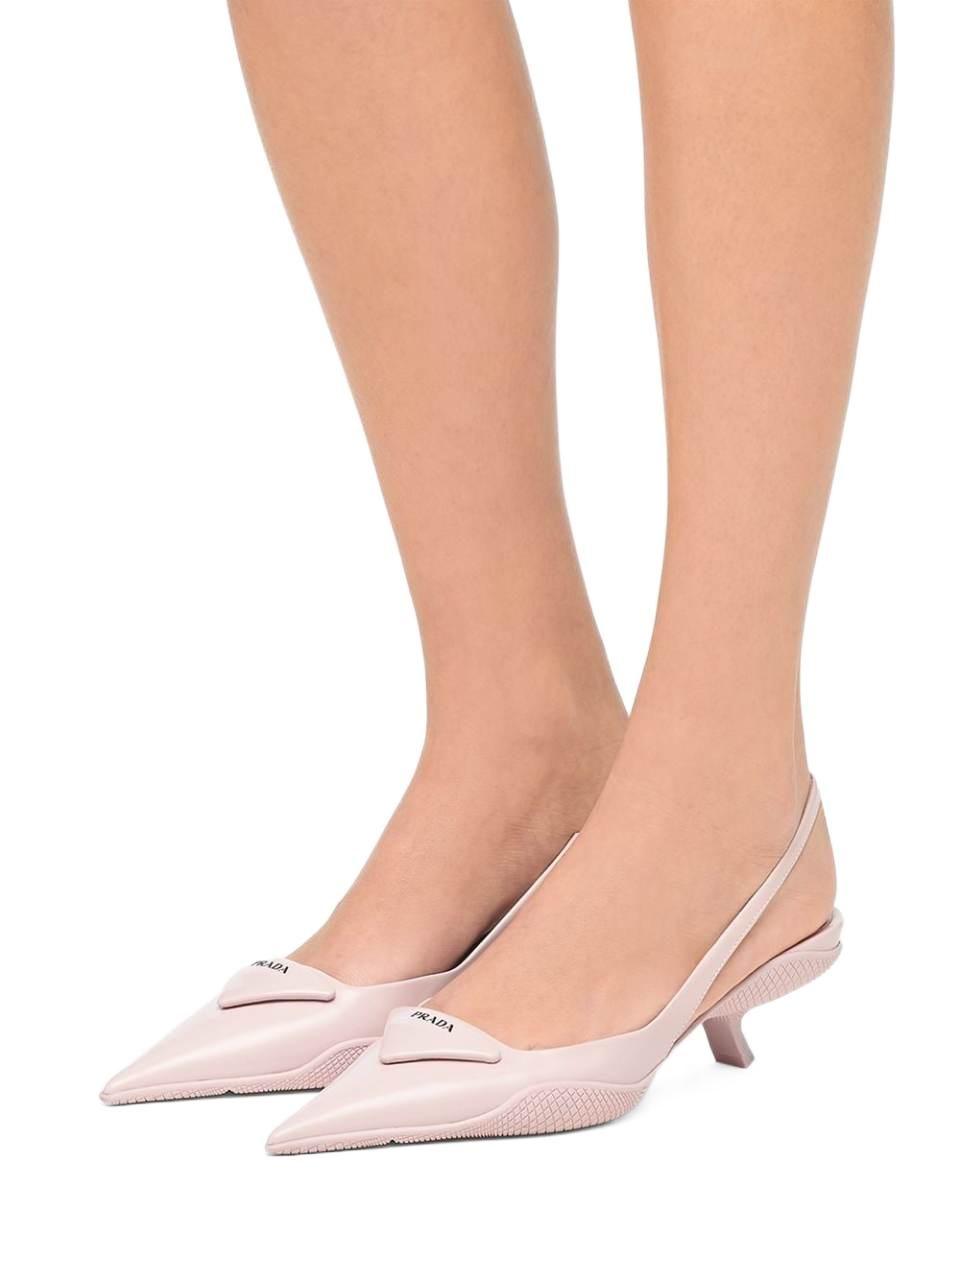 Prada Leather Gabardine Slingback Pointed Pumps in Pink - Save 37% | Lyst